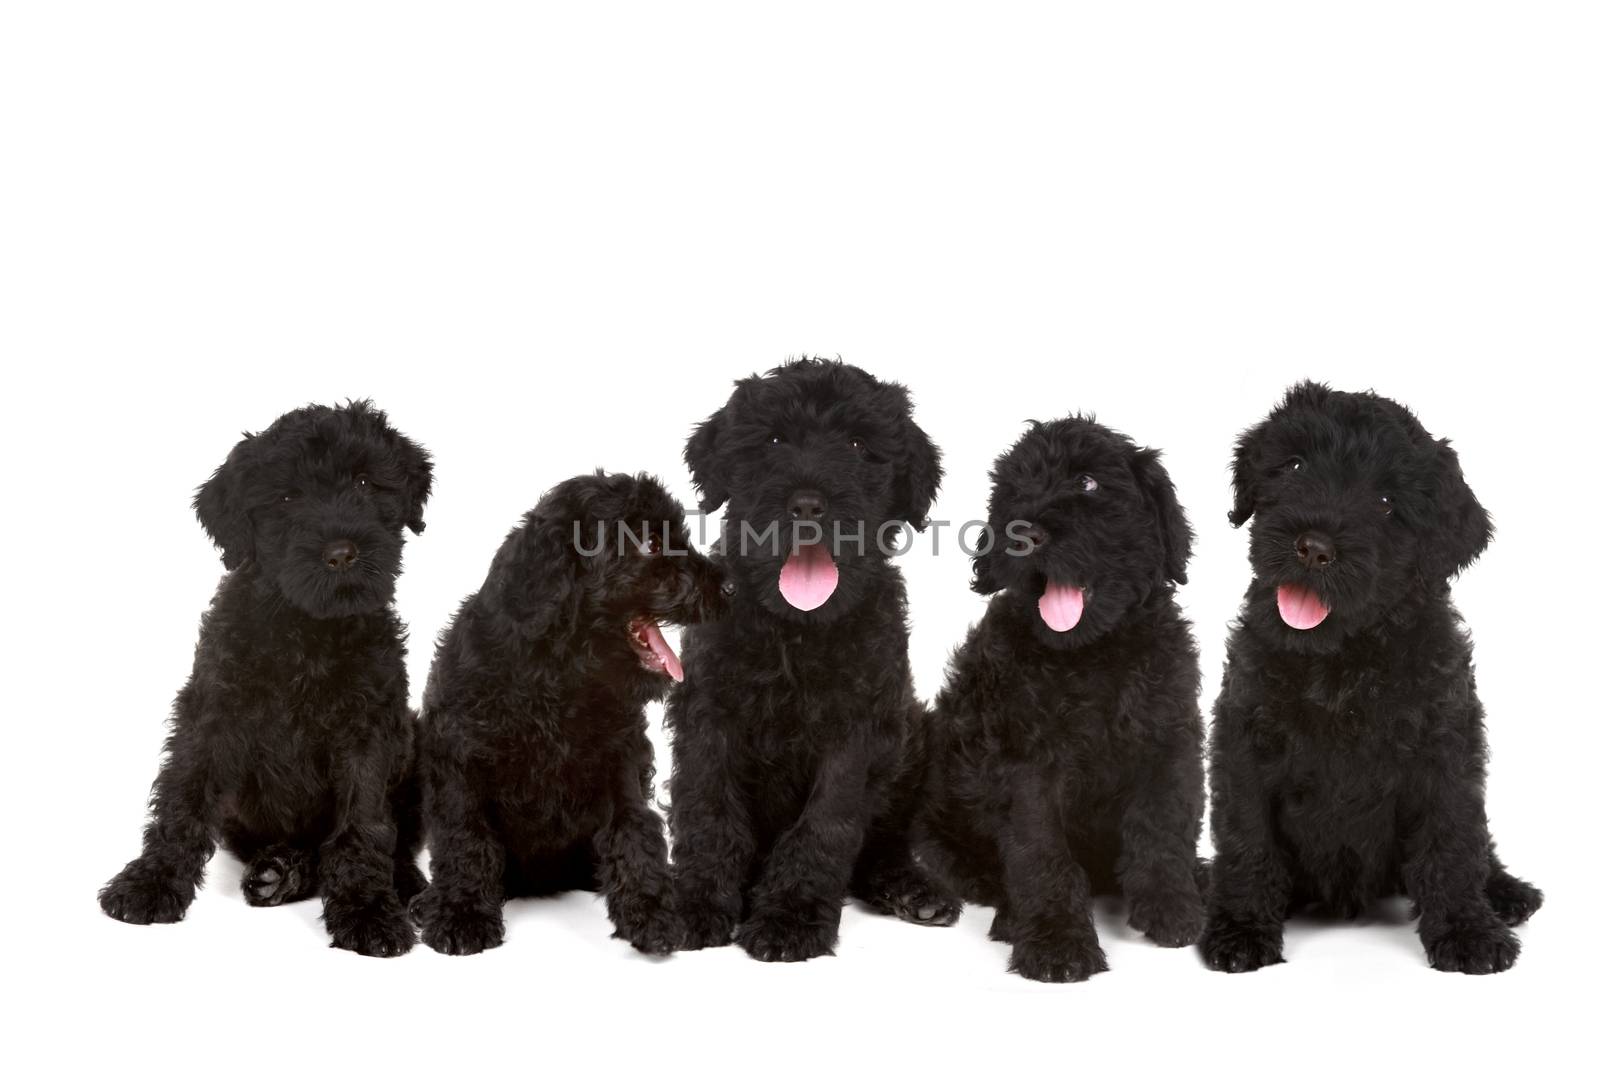 Group of Black Russian Terrier Puppies by tobkatrina